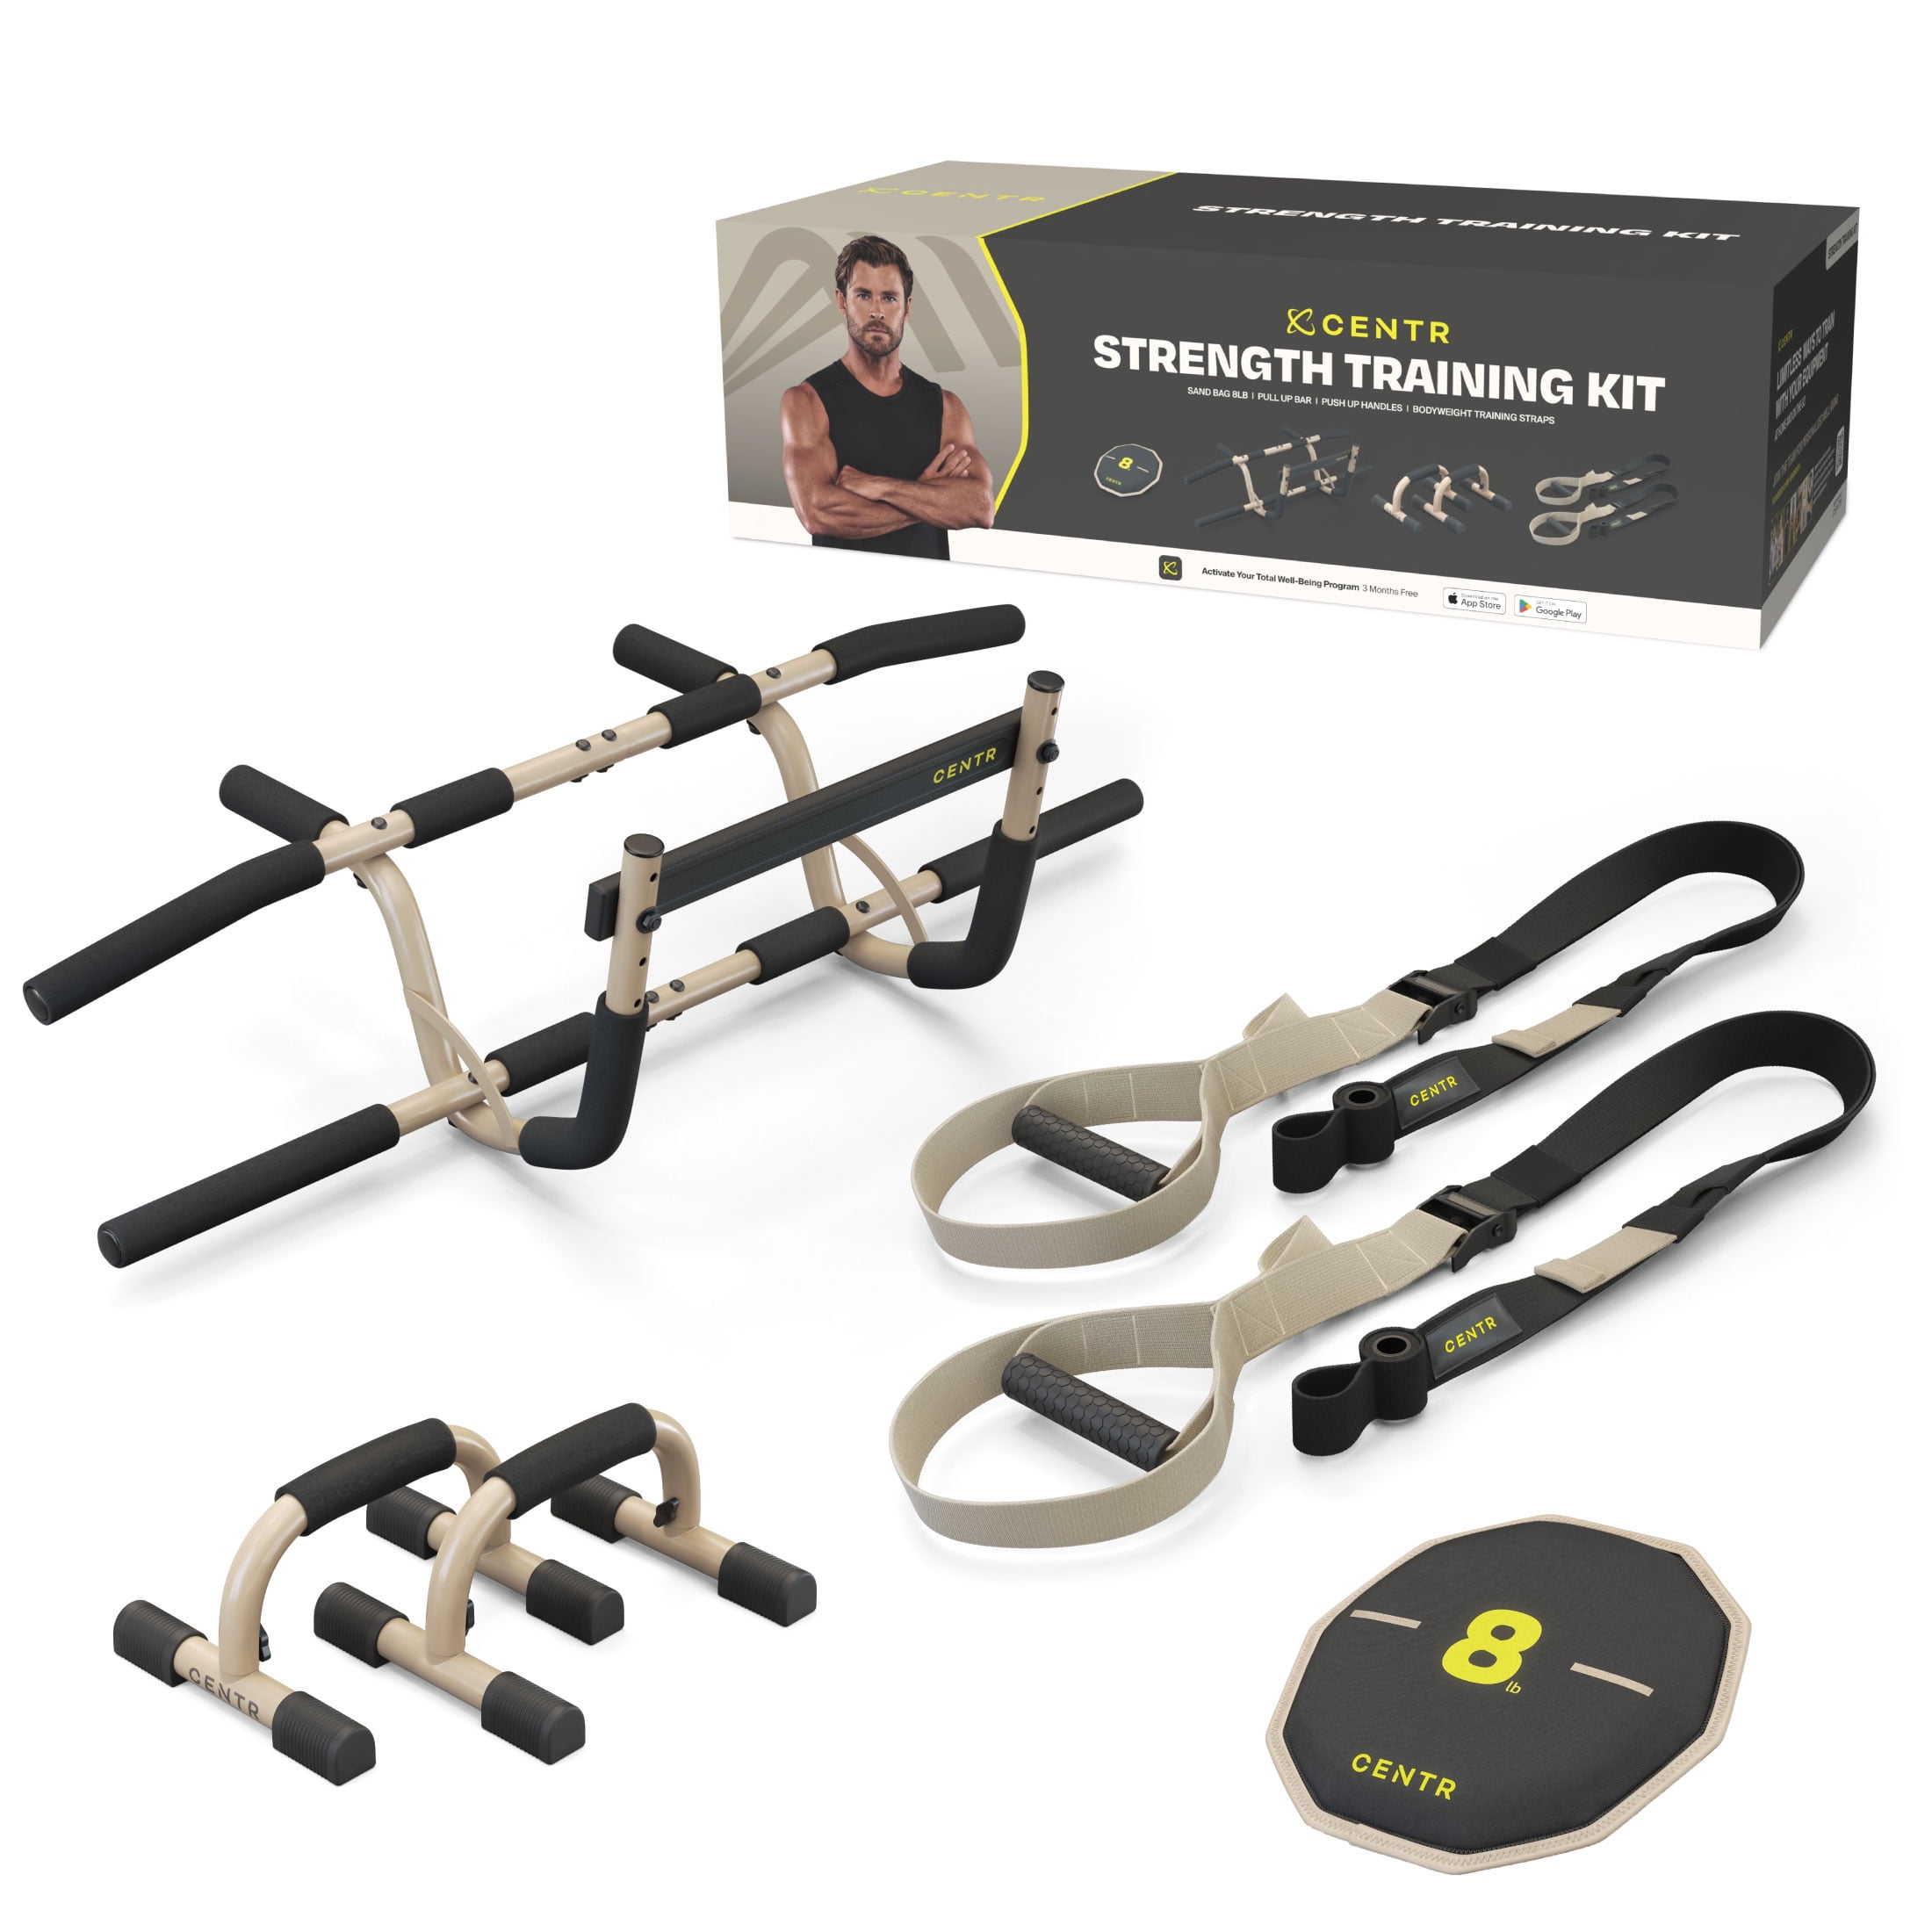 Centr By Chris Hemsworth Strength Training Kit, Home Workout